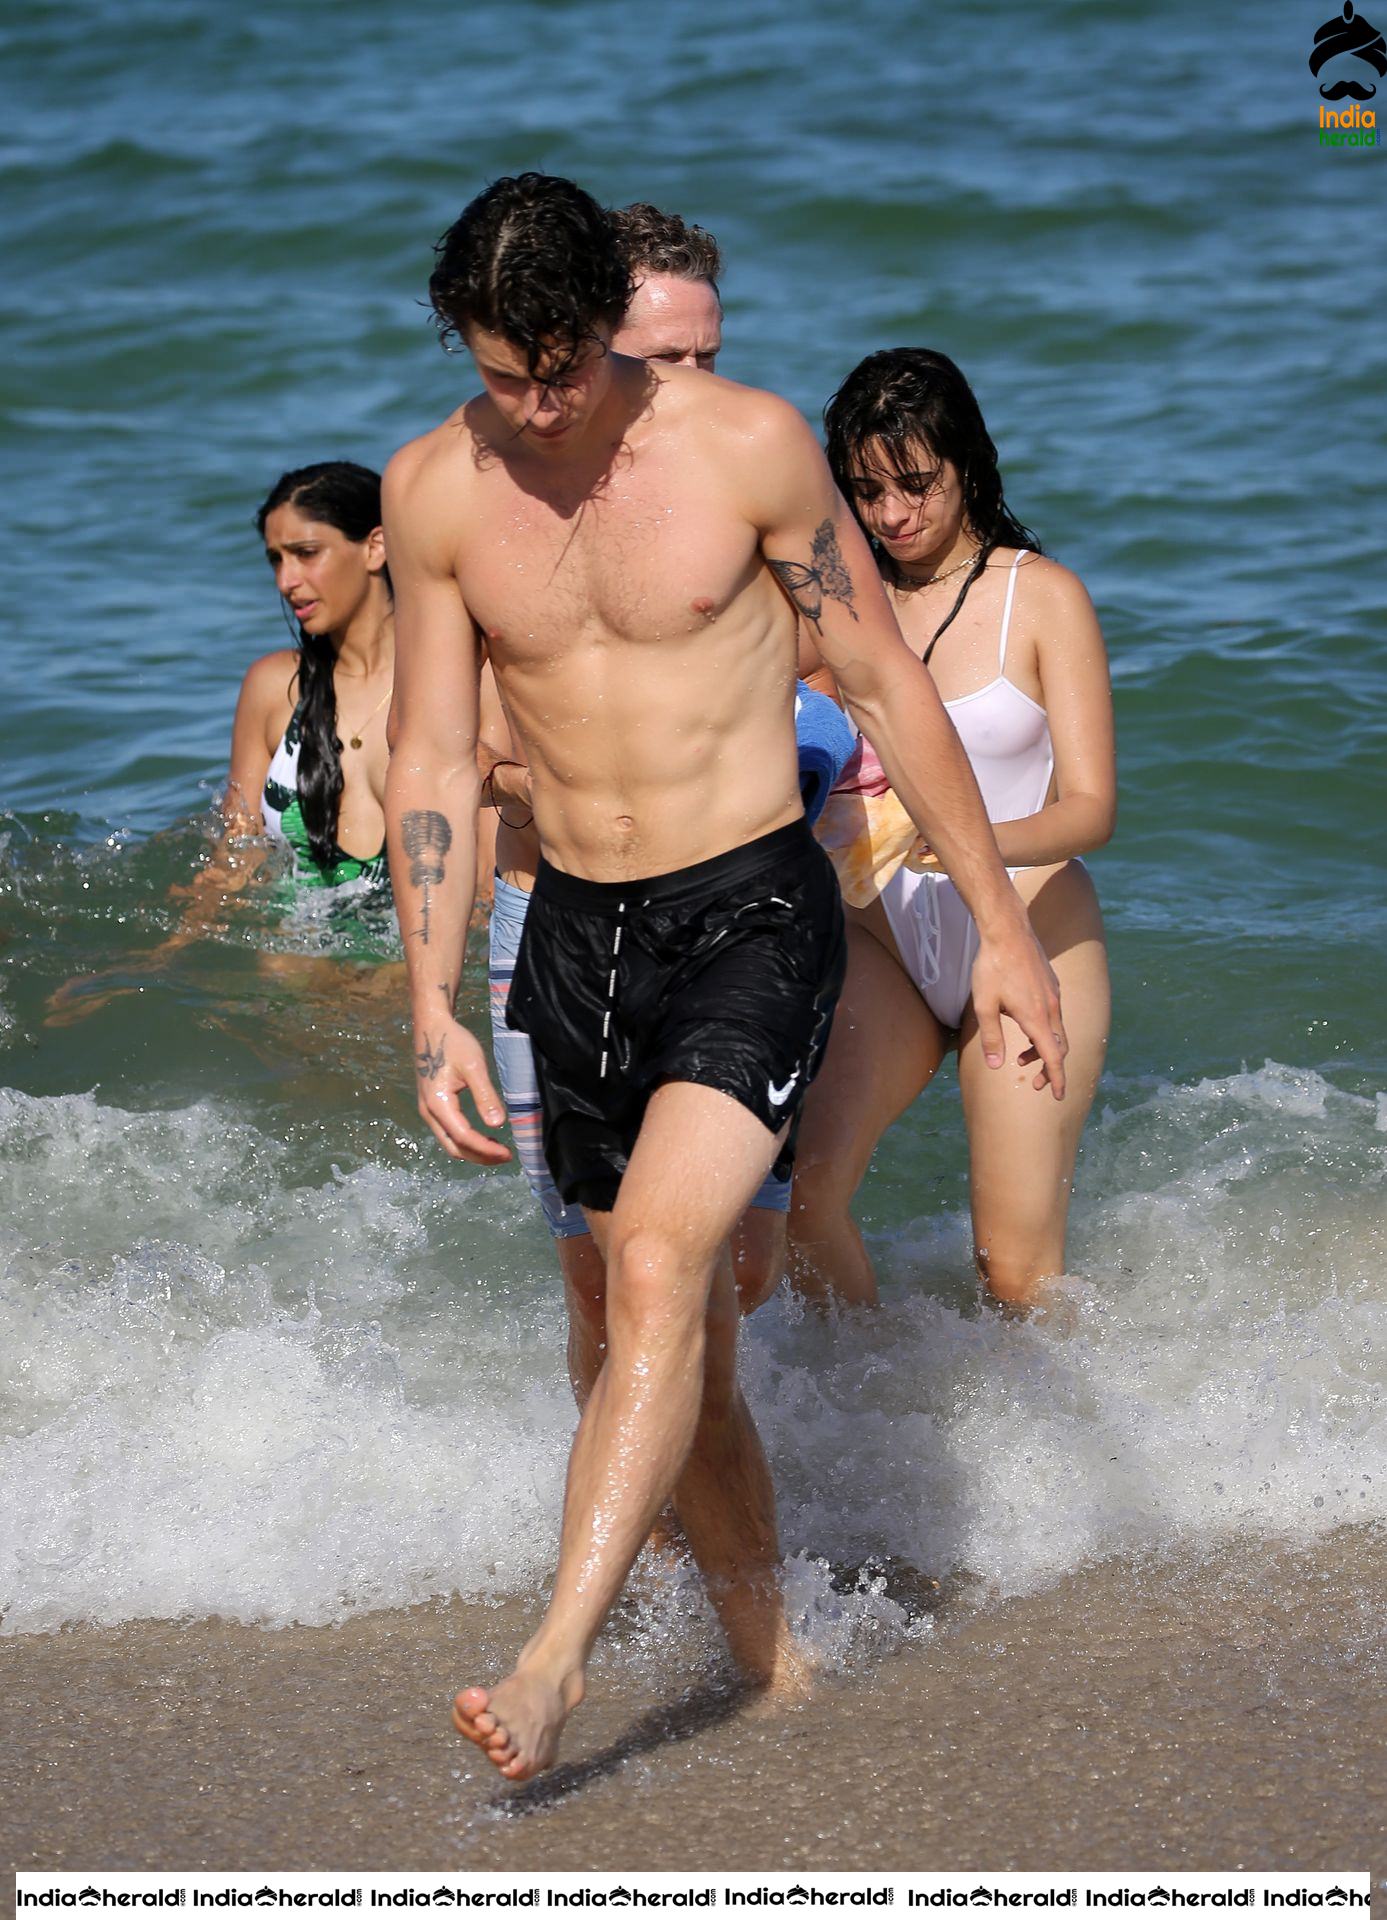 Camila Cabello and Shawn Mendes at a Beach in Miami Set 1